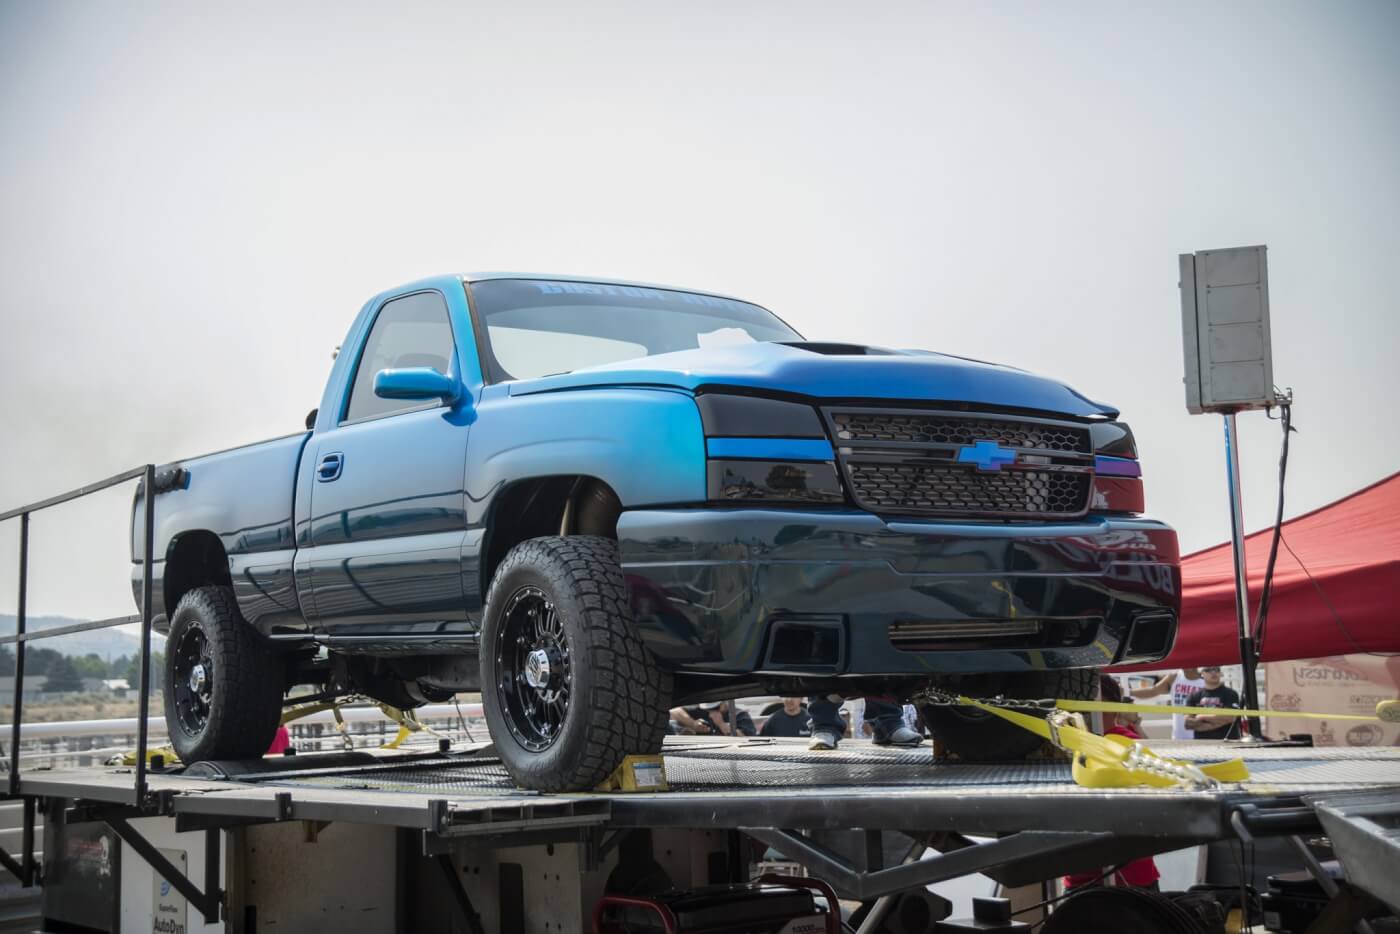 Custom Autos' purpose-built dyno truck always puts on a show and with a 1,331-horspower fuel-only run, it had enough to win top prize money on the day. A pair of ball bearing Garrett turbos, some big Industrial Injection injectors and CP3 pumps and their in-house built engine makes for a deadly combination when it comes to making power.